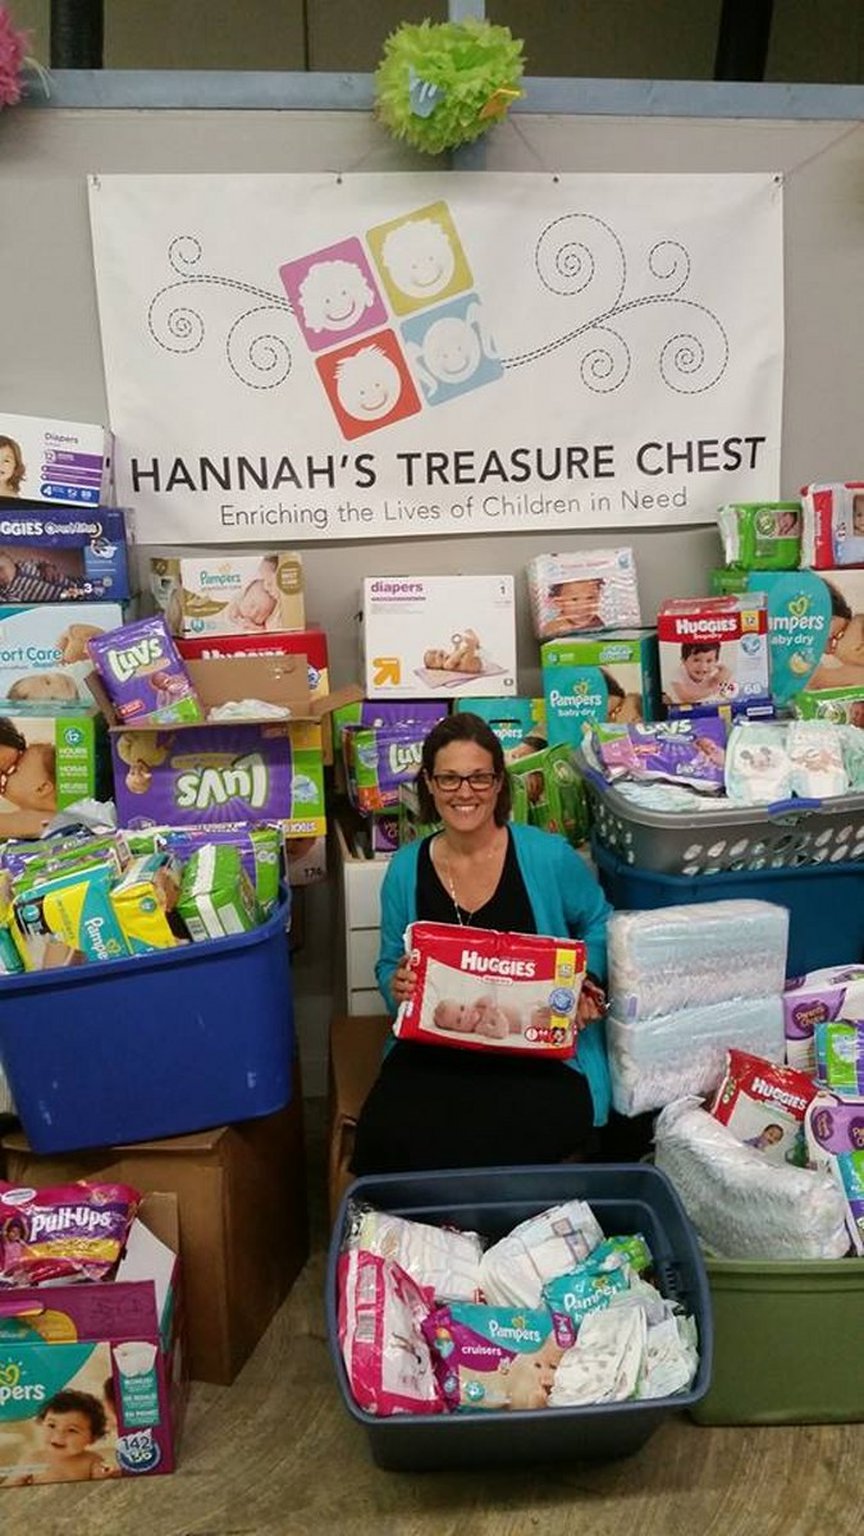 Hannah's Treasure Chest – Enriching the Lives of Children in Need